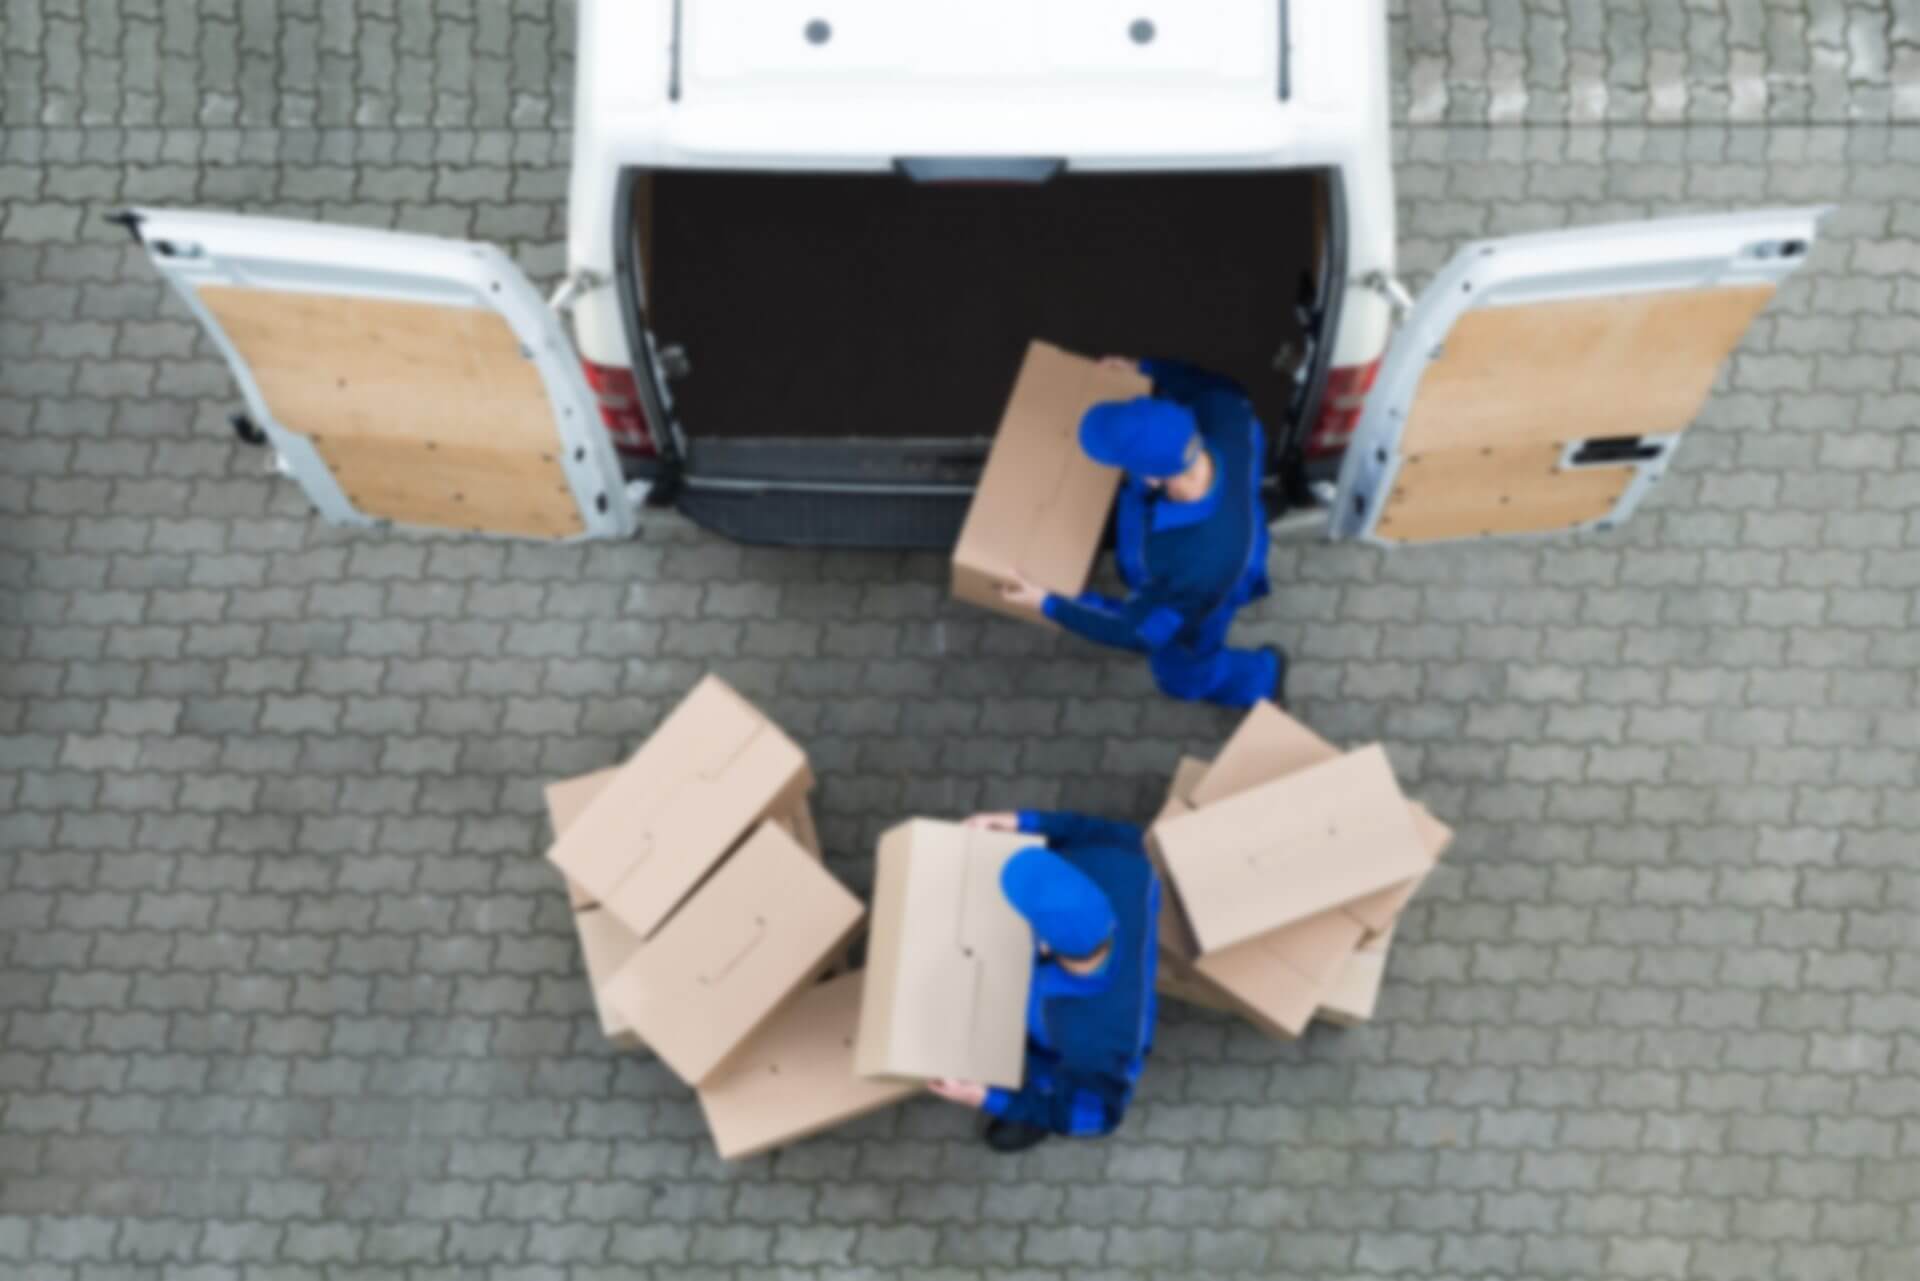 Your long distance moving company – Master Movers, in Portland, OR